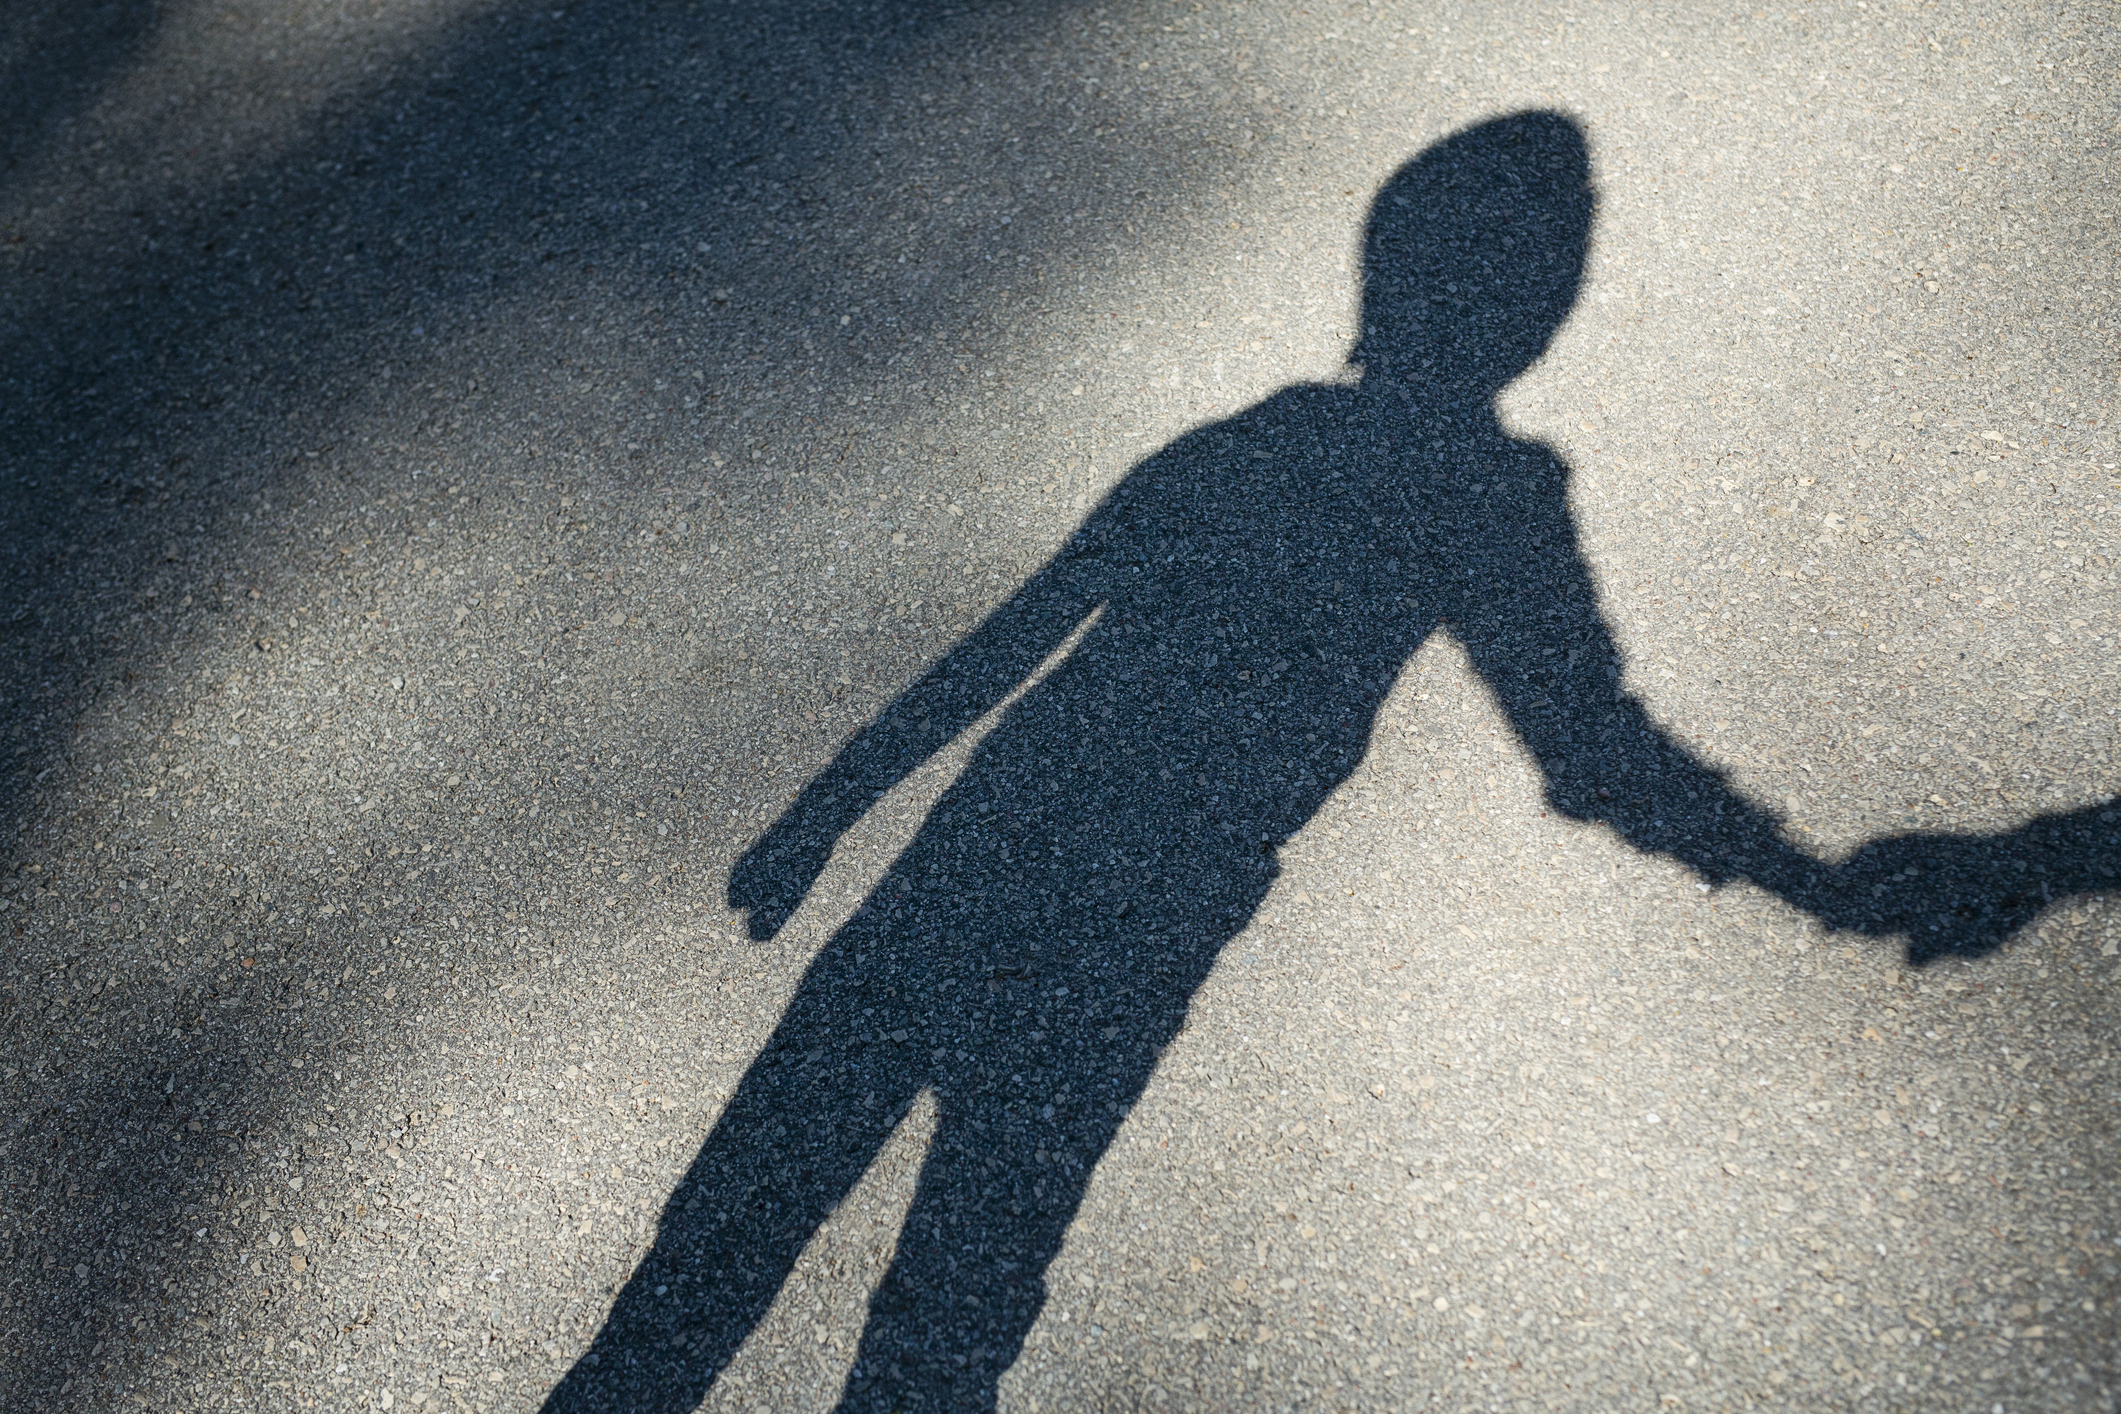 Shadow of a person on pavement, holding hands with a child&#x27;s shadow